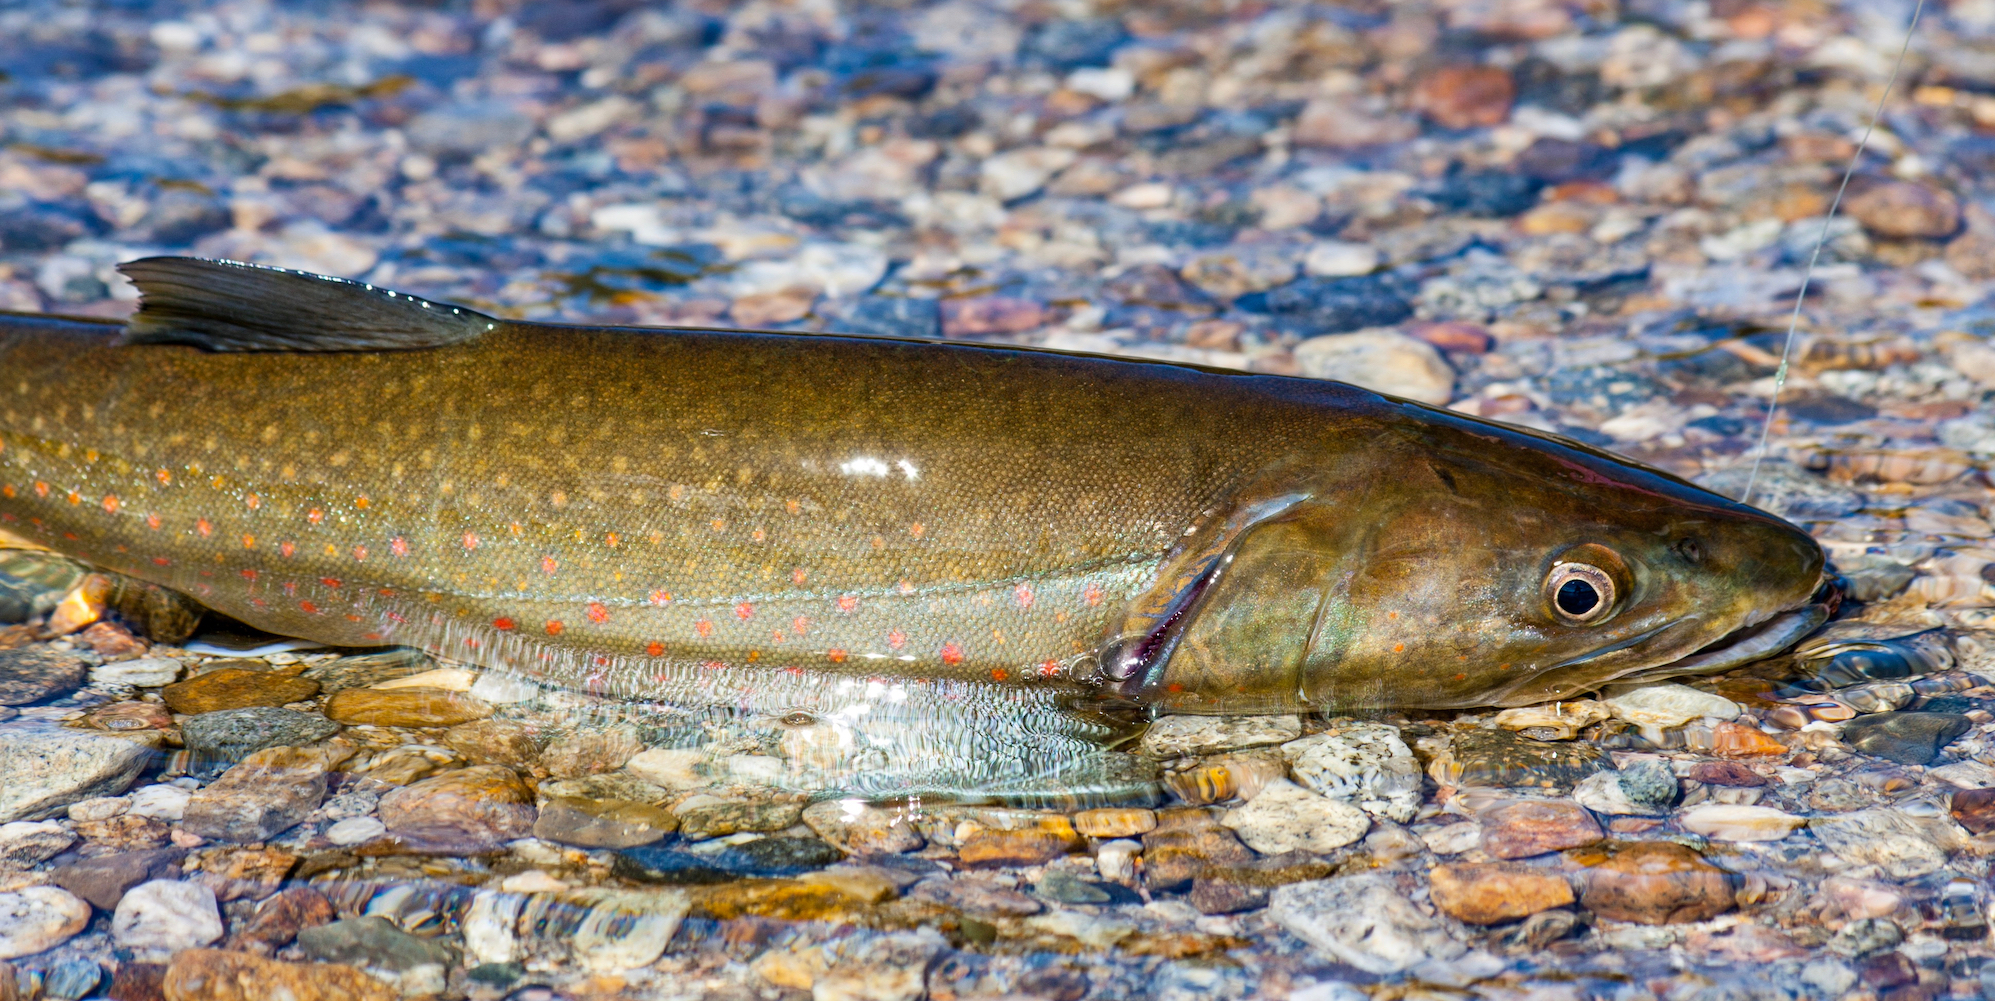 Bull trout swimming atop shallow water on colorful rocks